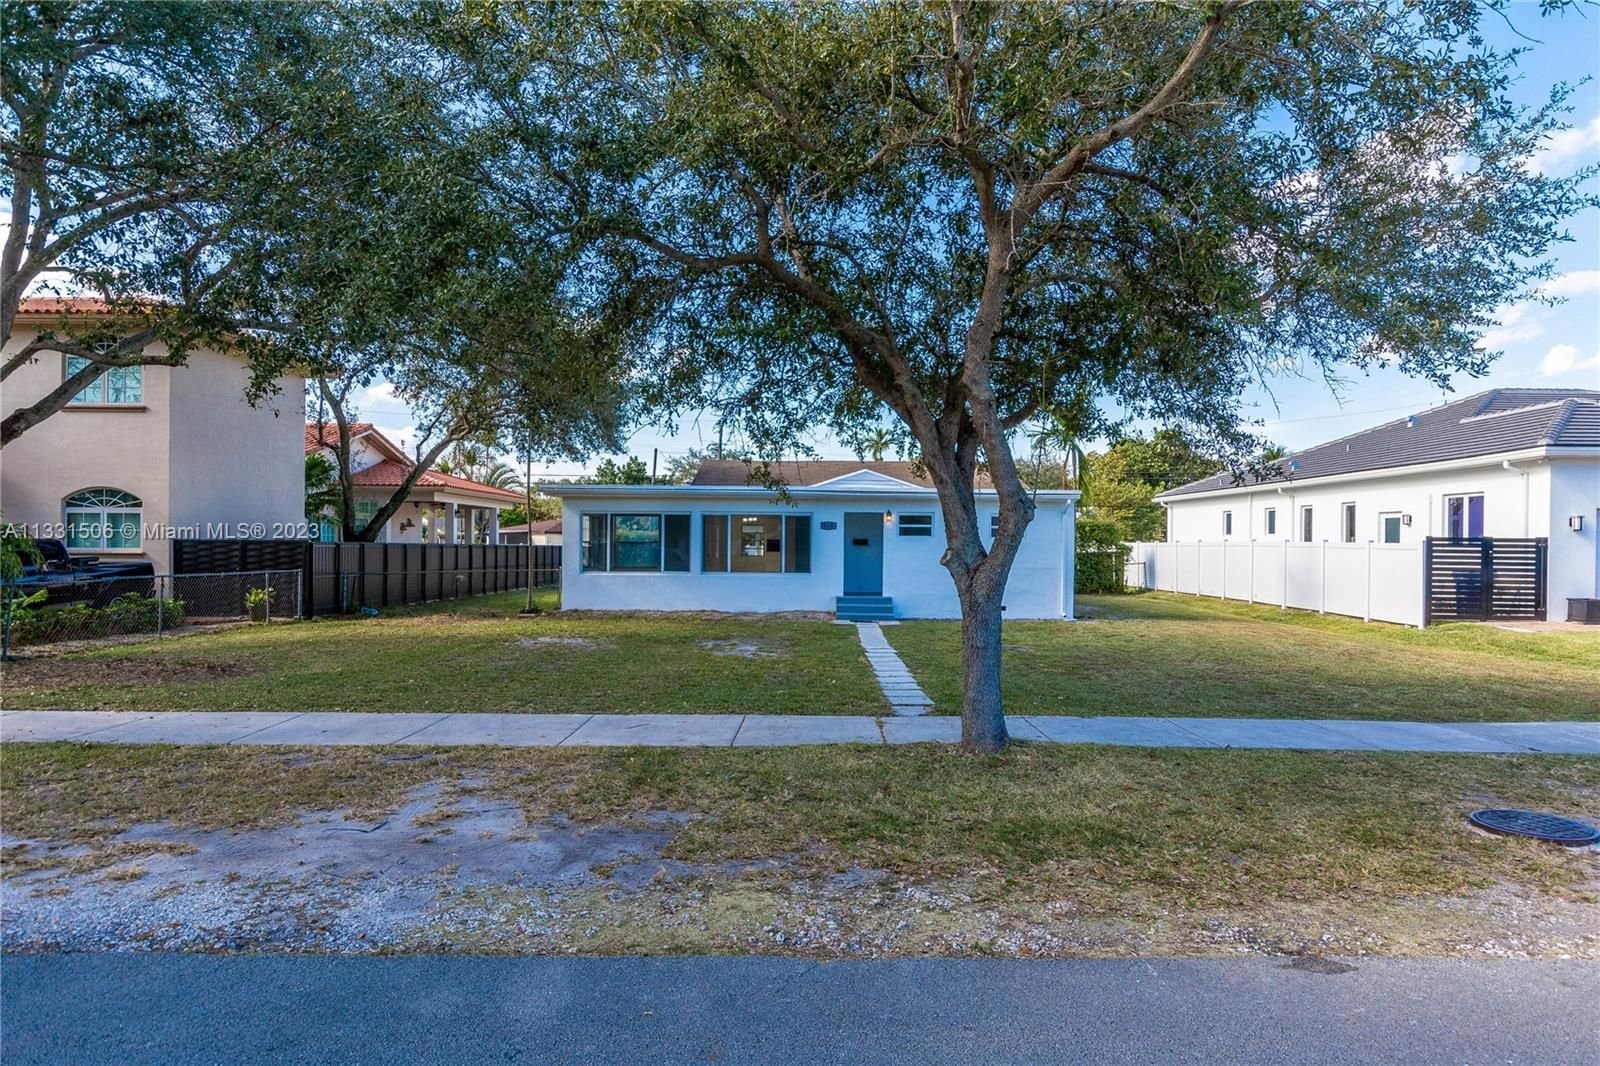 Real estate property located at 343 Melrose Dr, Miami-Dade County, Miami Springs, FL